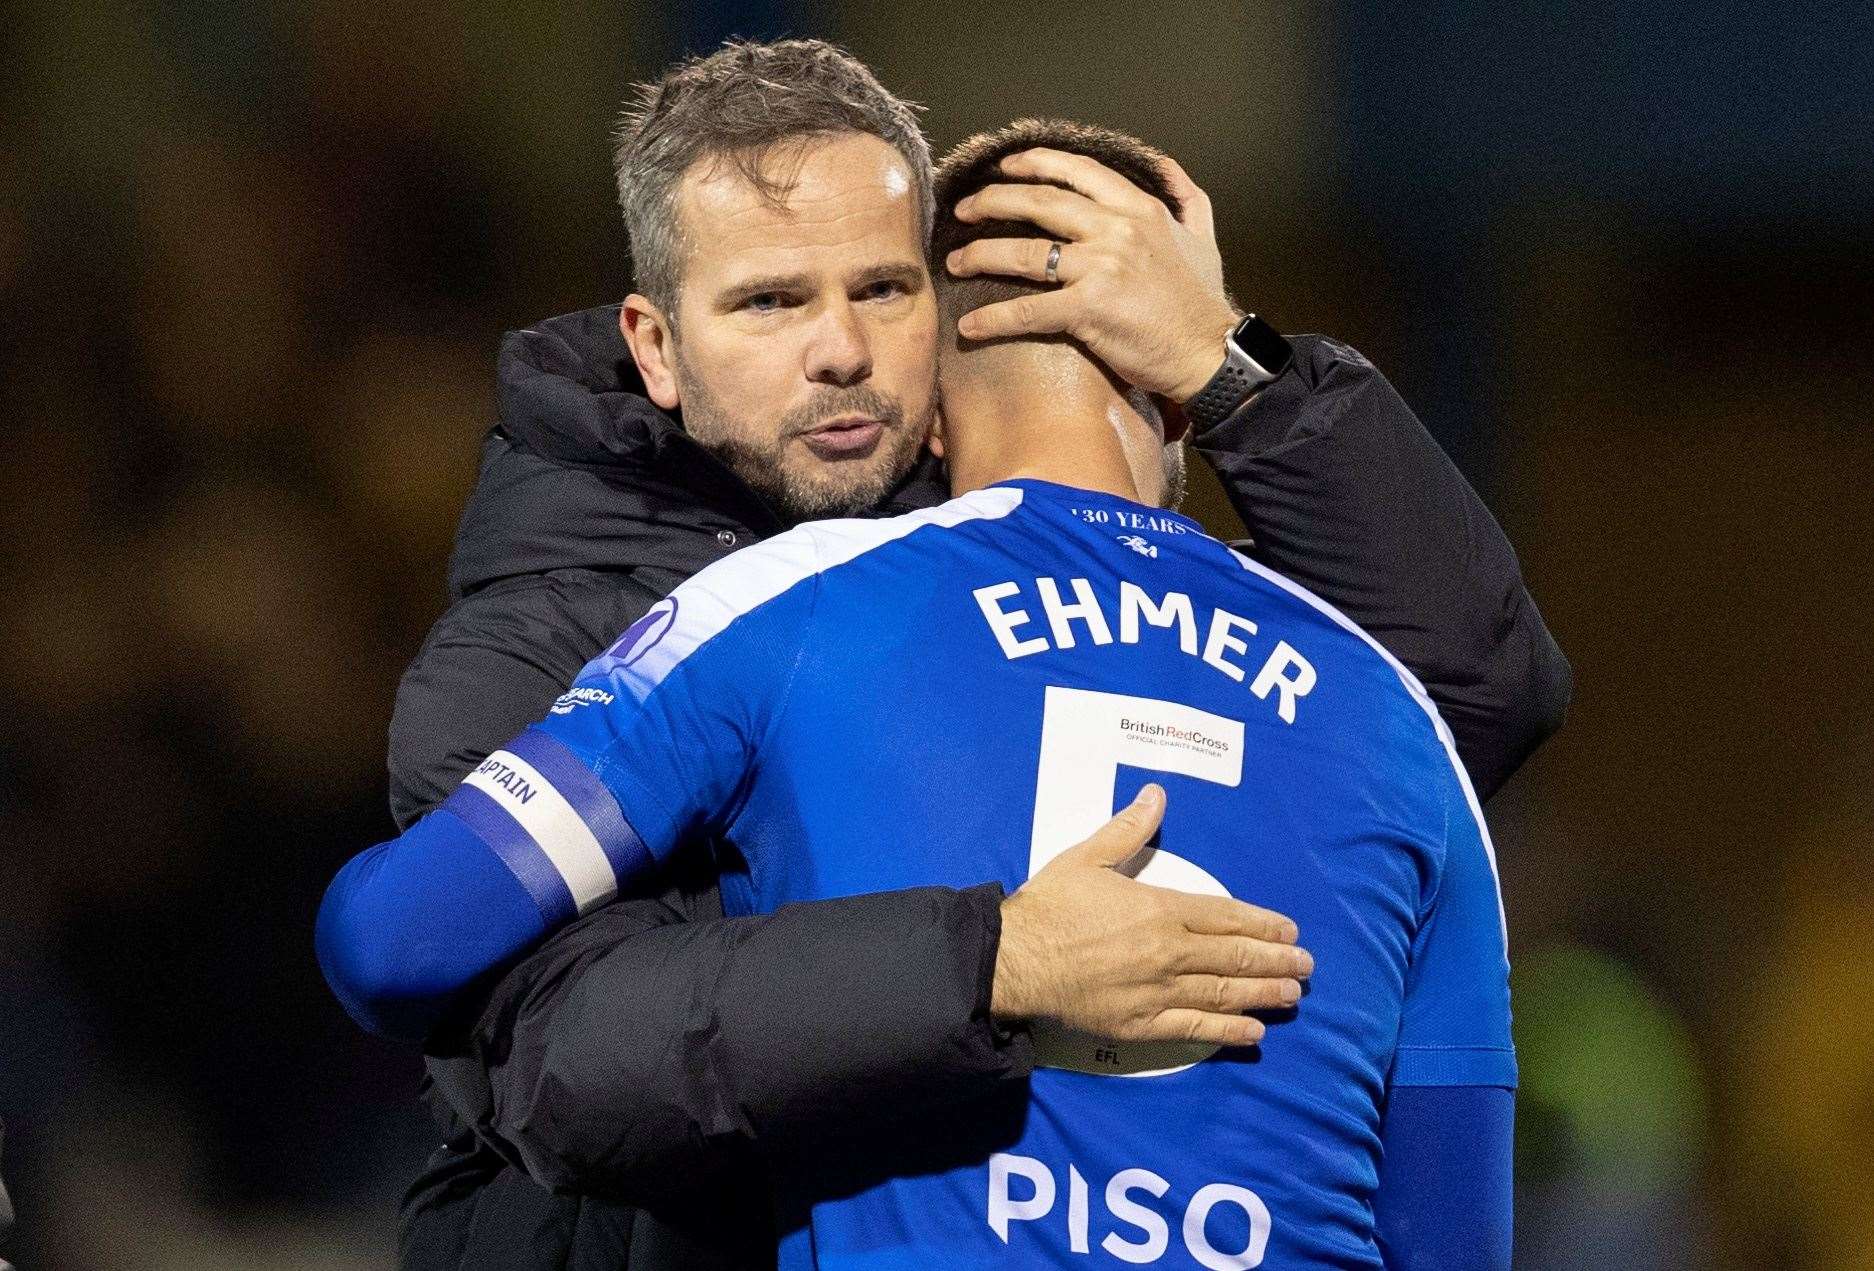 Head coach Stephen Clemence congratulates Max Ehmer after a 1-0 win for Gillingham over Sutton Picture: @Julian_KPI